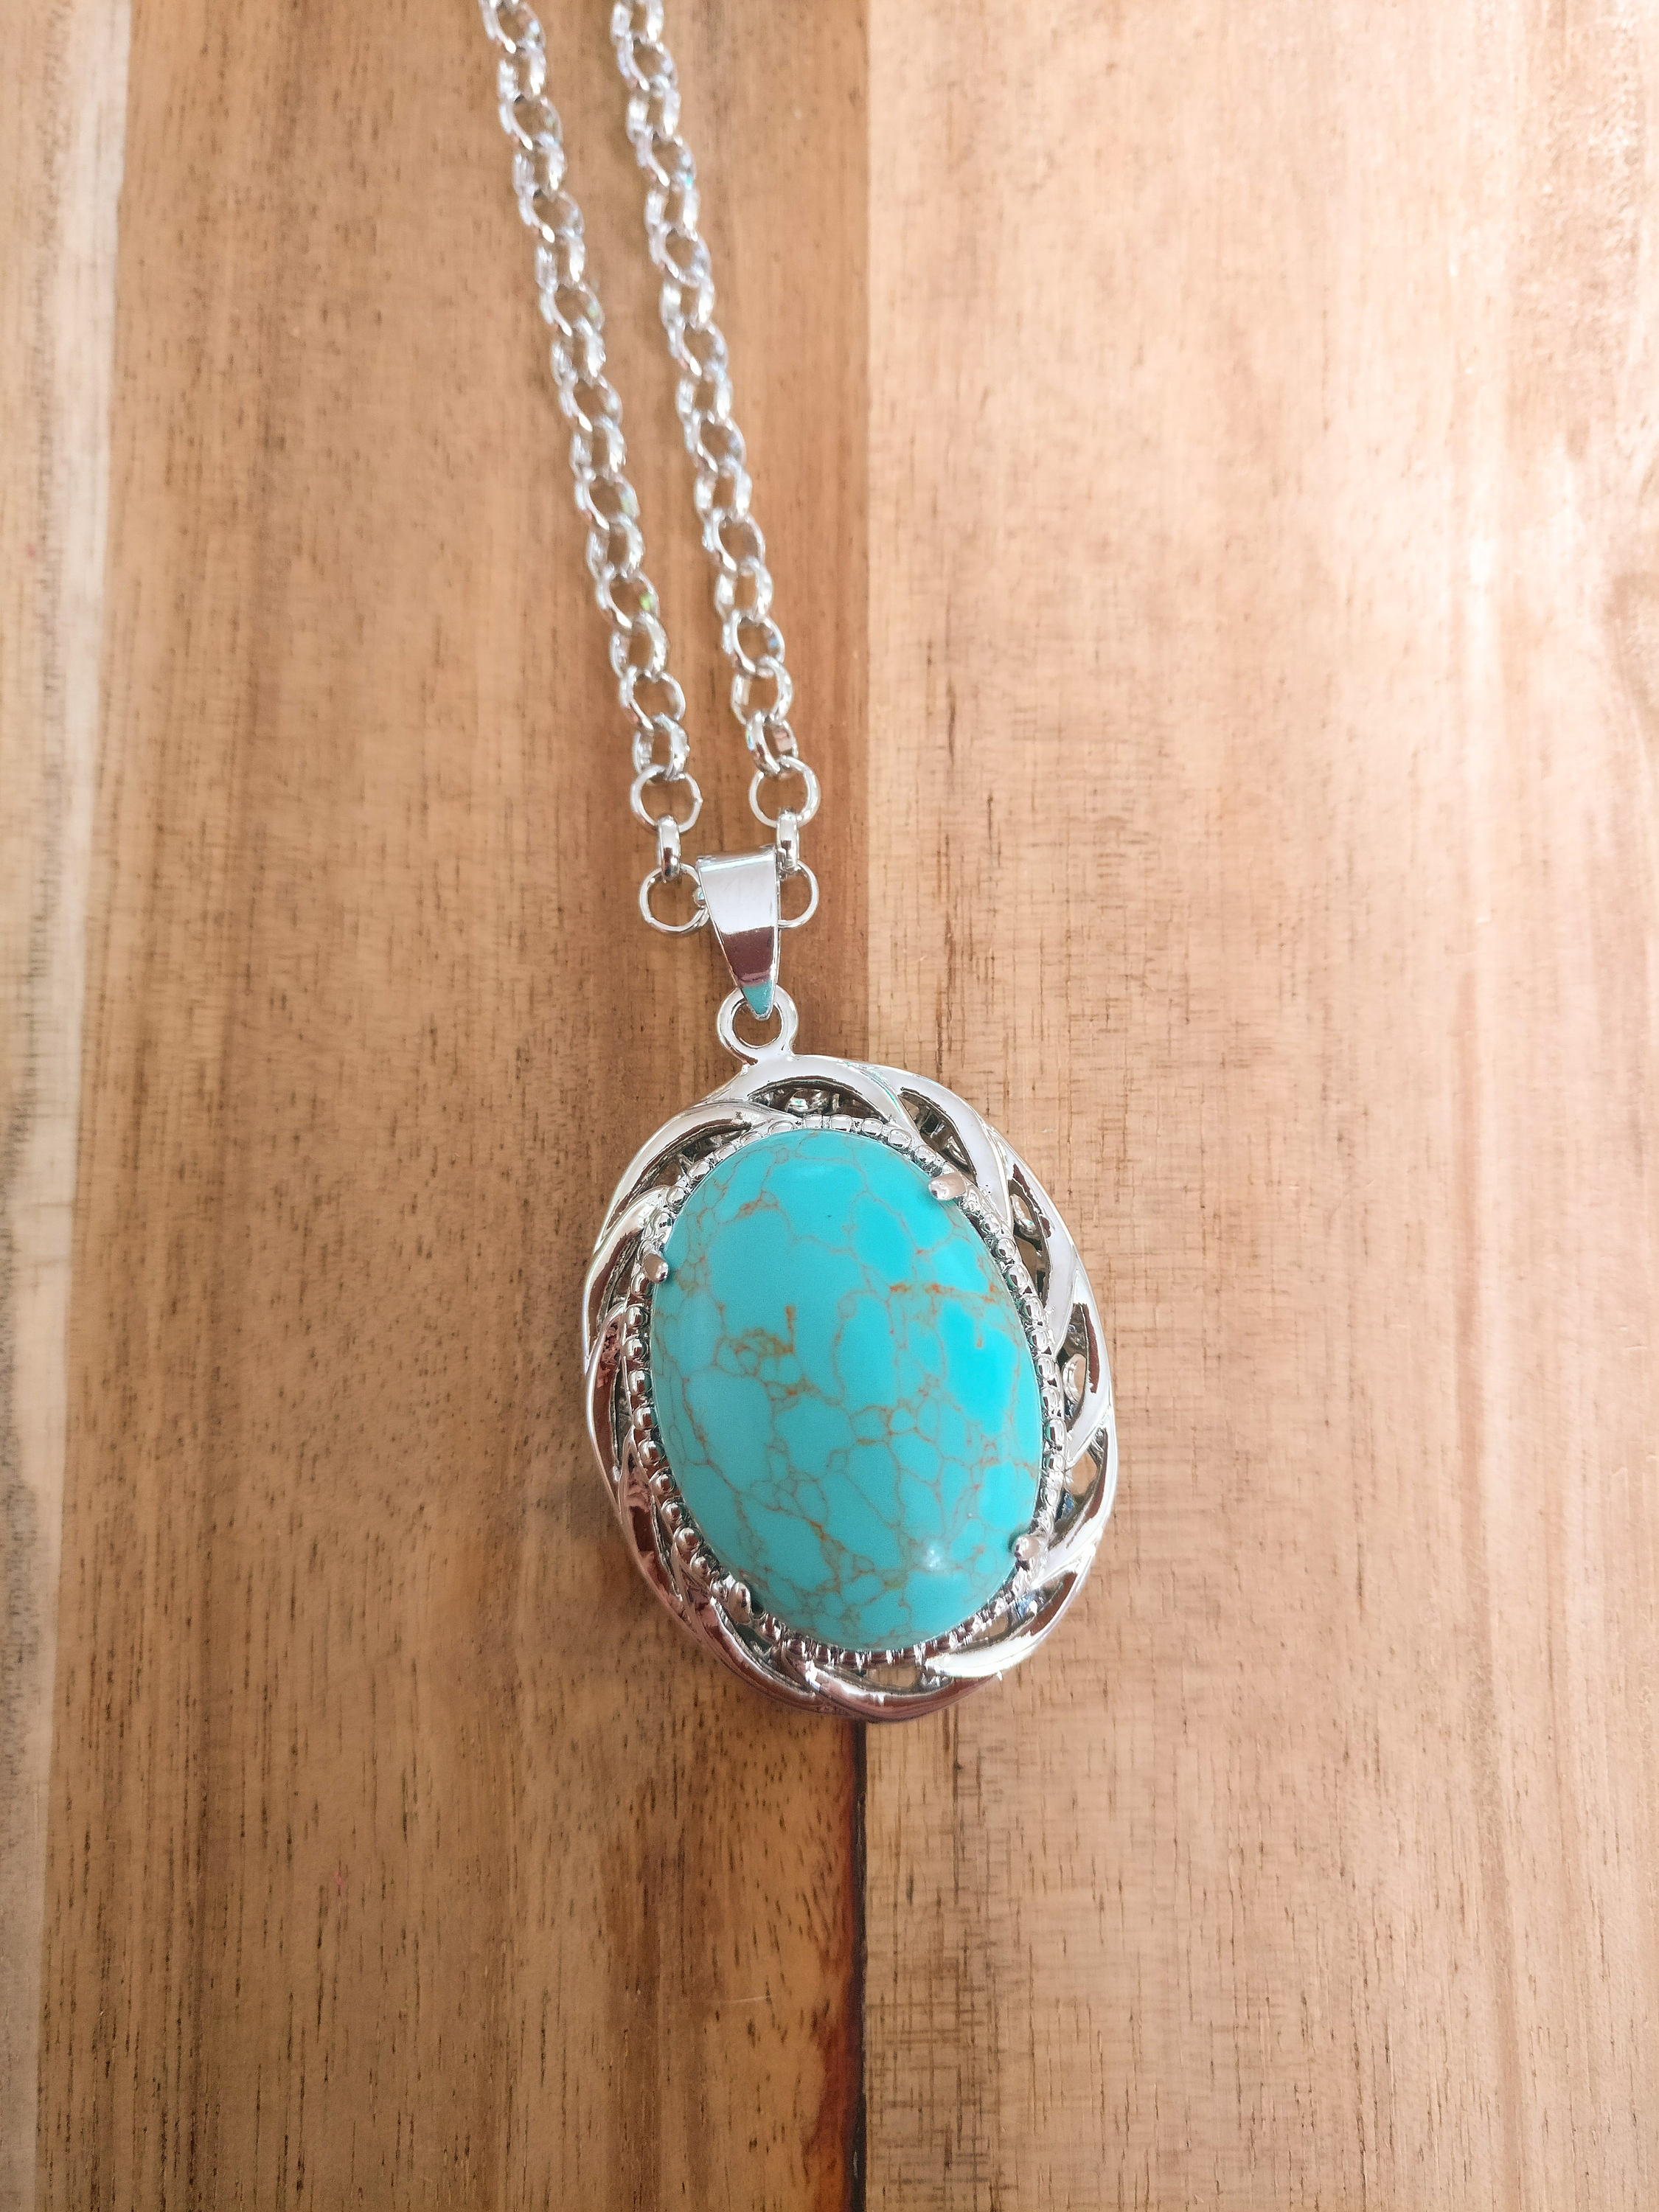 Necklace with stone necklace blue stone necklace turquoise